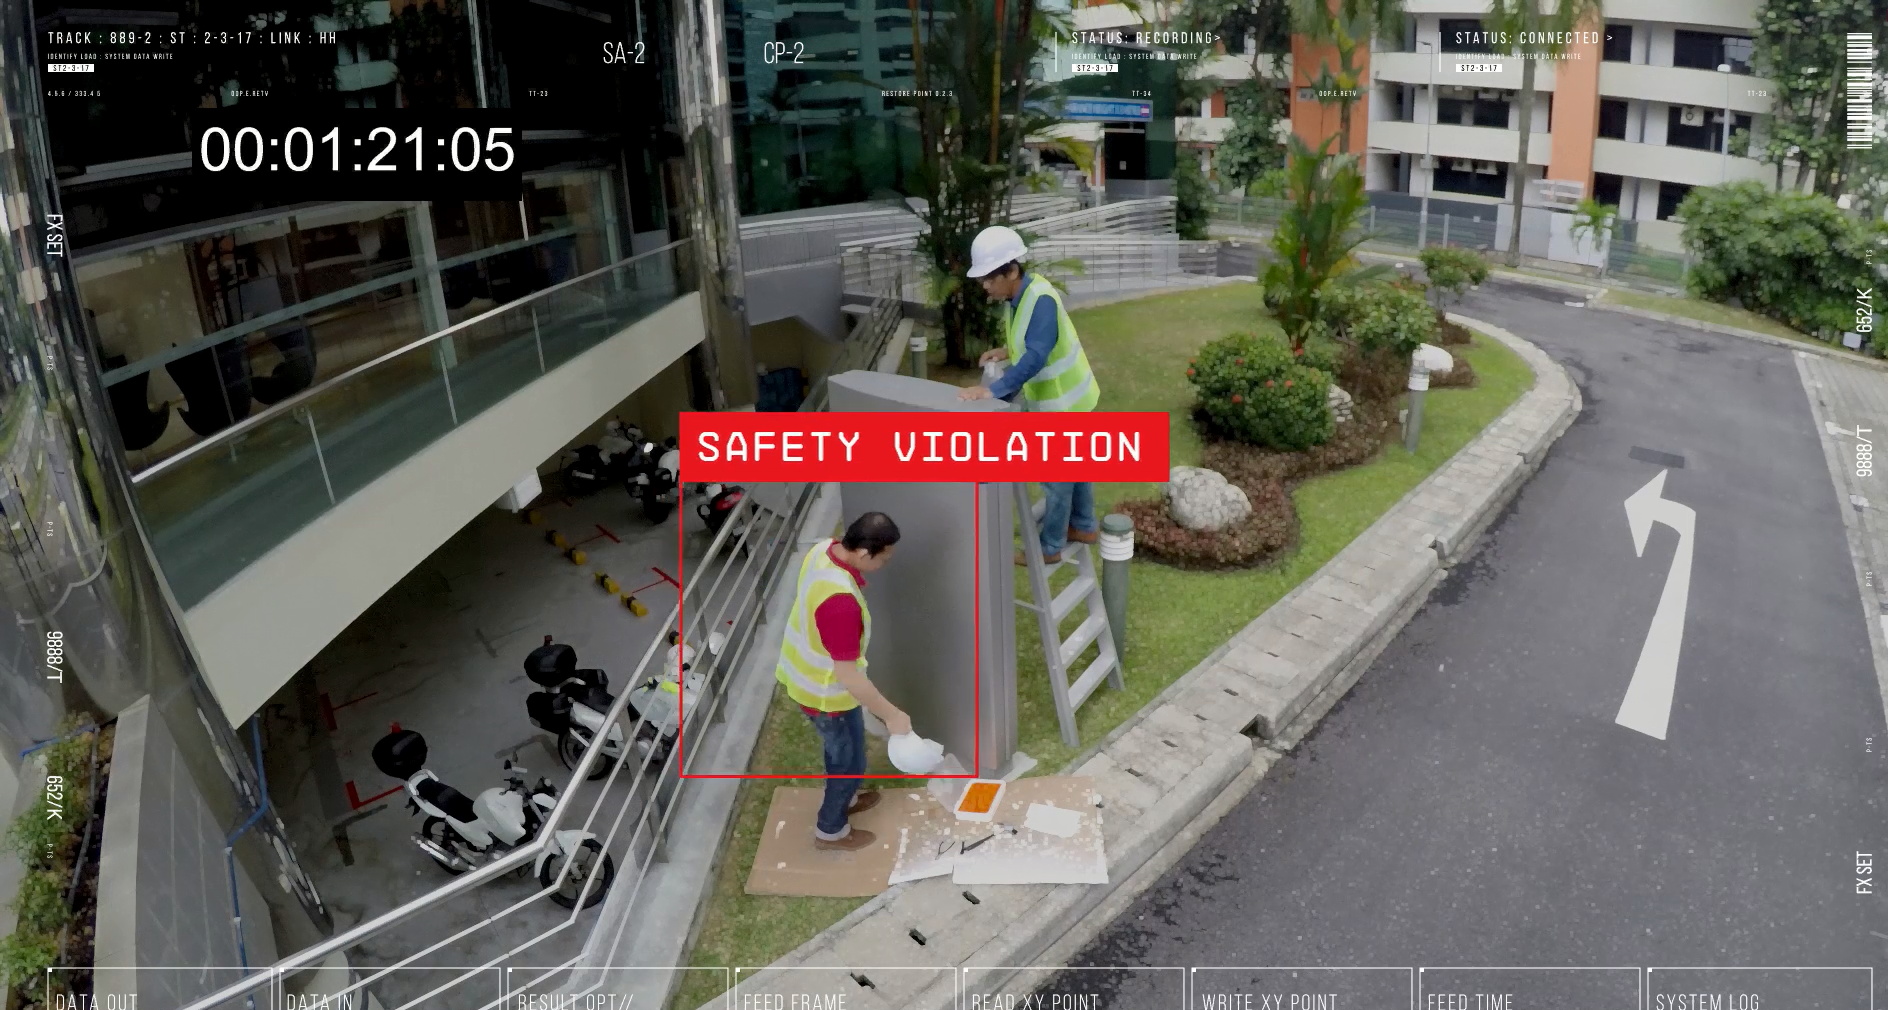 AI detects that employee is not wearing a helmet, and alerts site supervisor who can then take the necessary precautionary measure